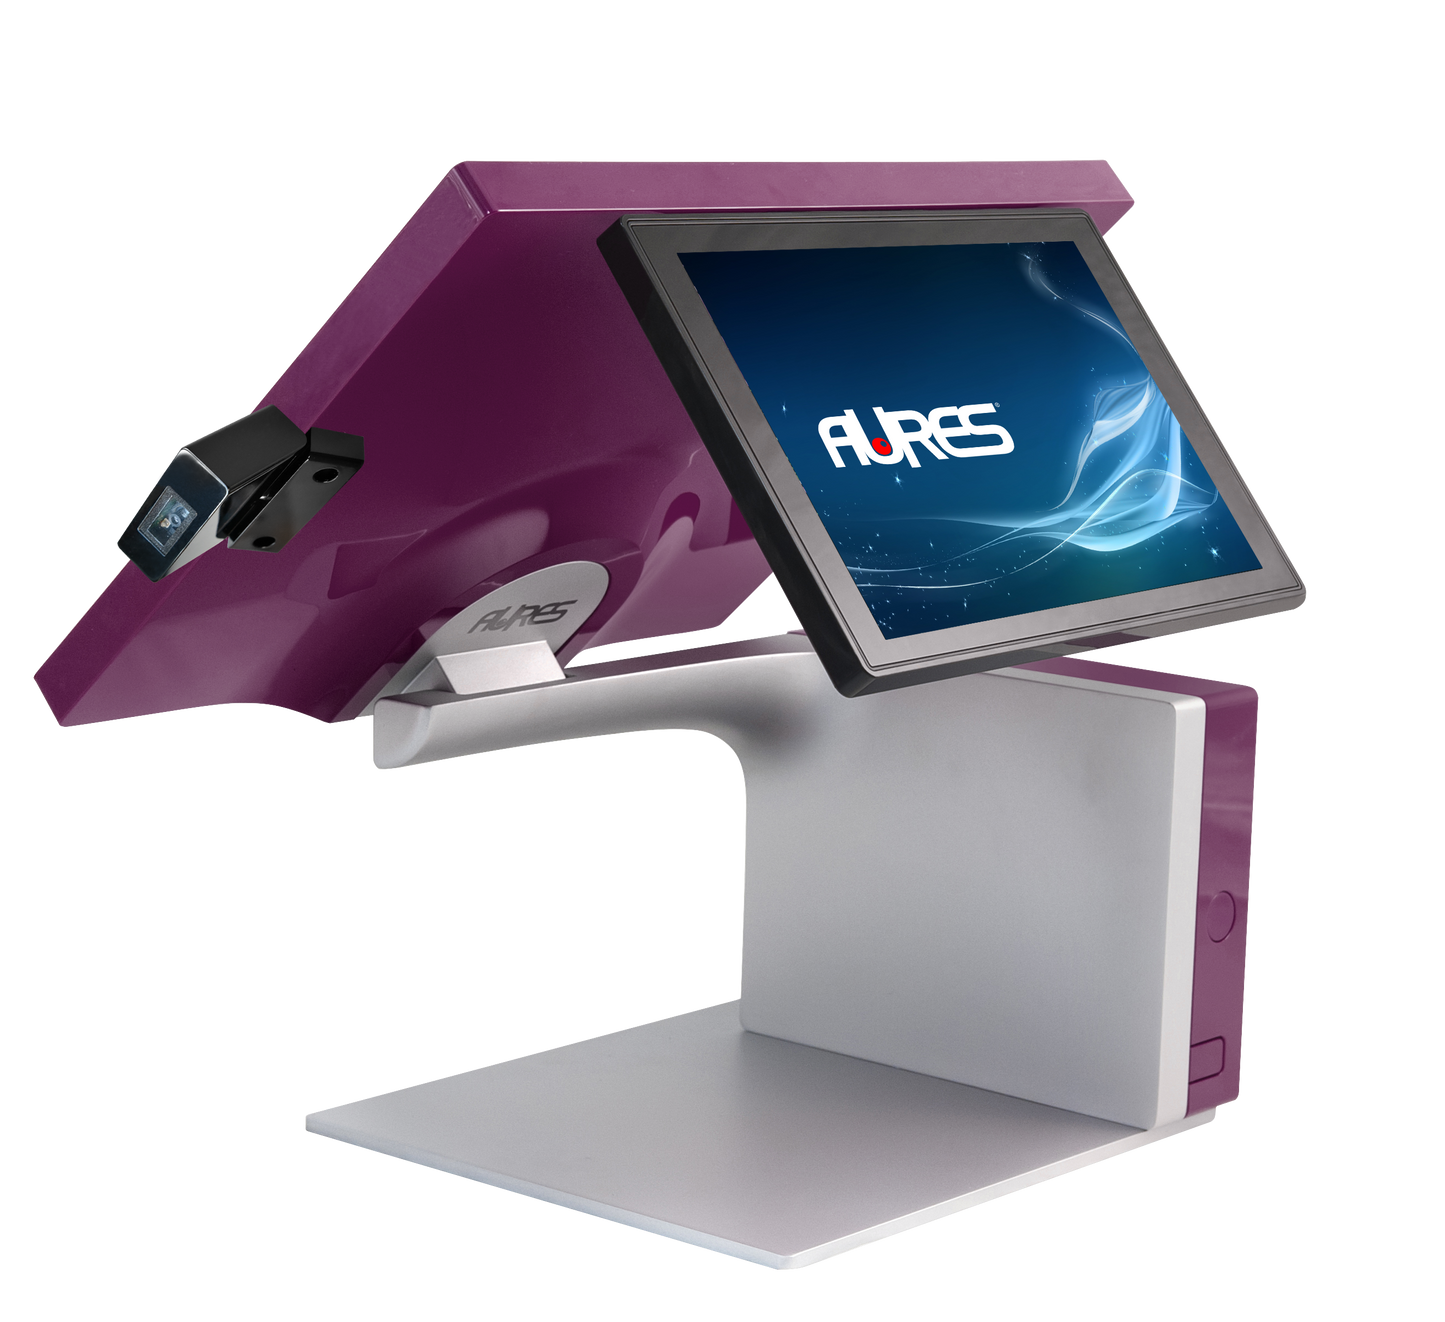 Aures SANGO  Intel Tiger Lake i5-1135G7 4.2 GHz Processor Touch POS 15” Inch  7 Colors Available